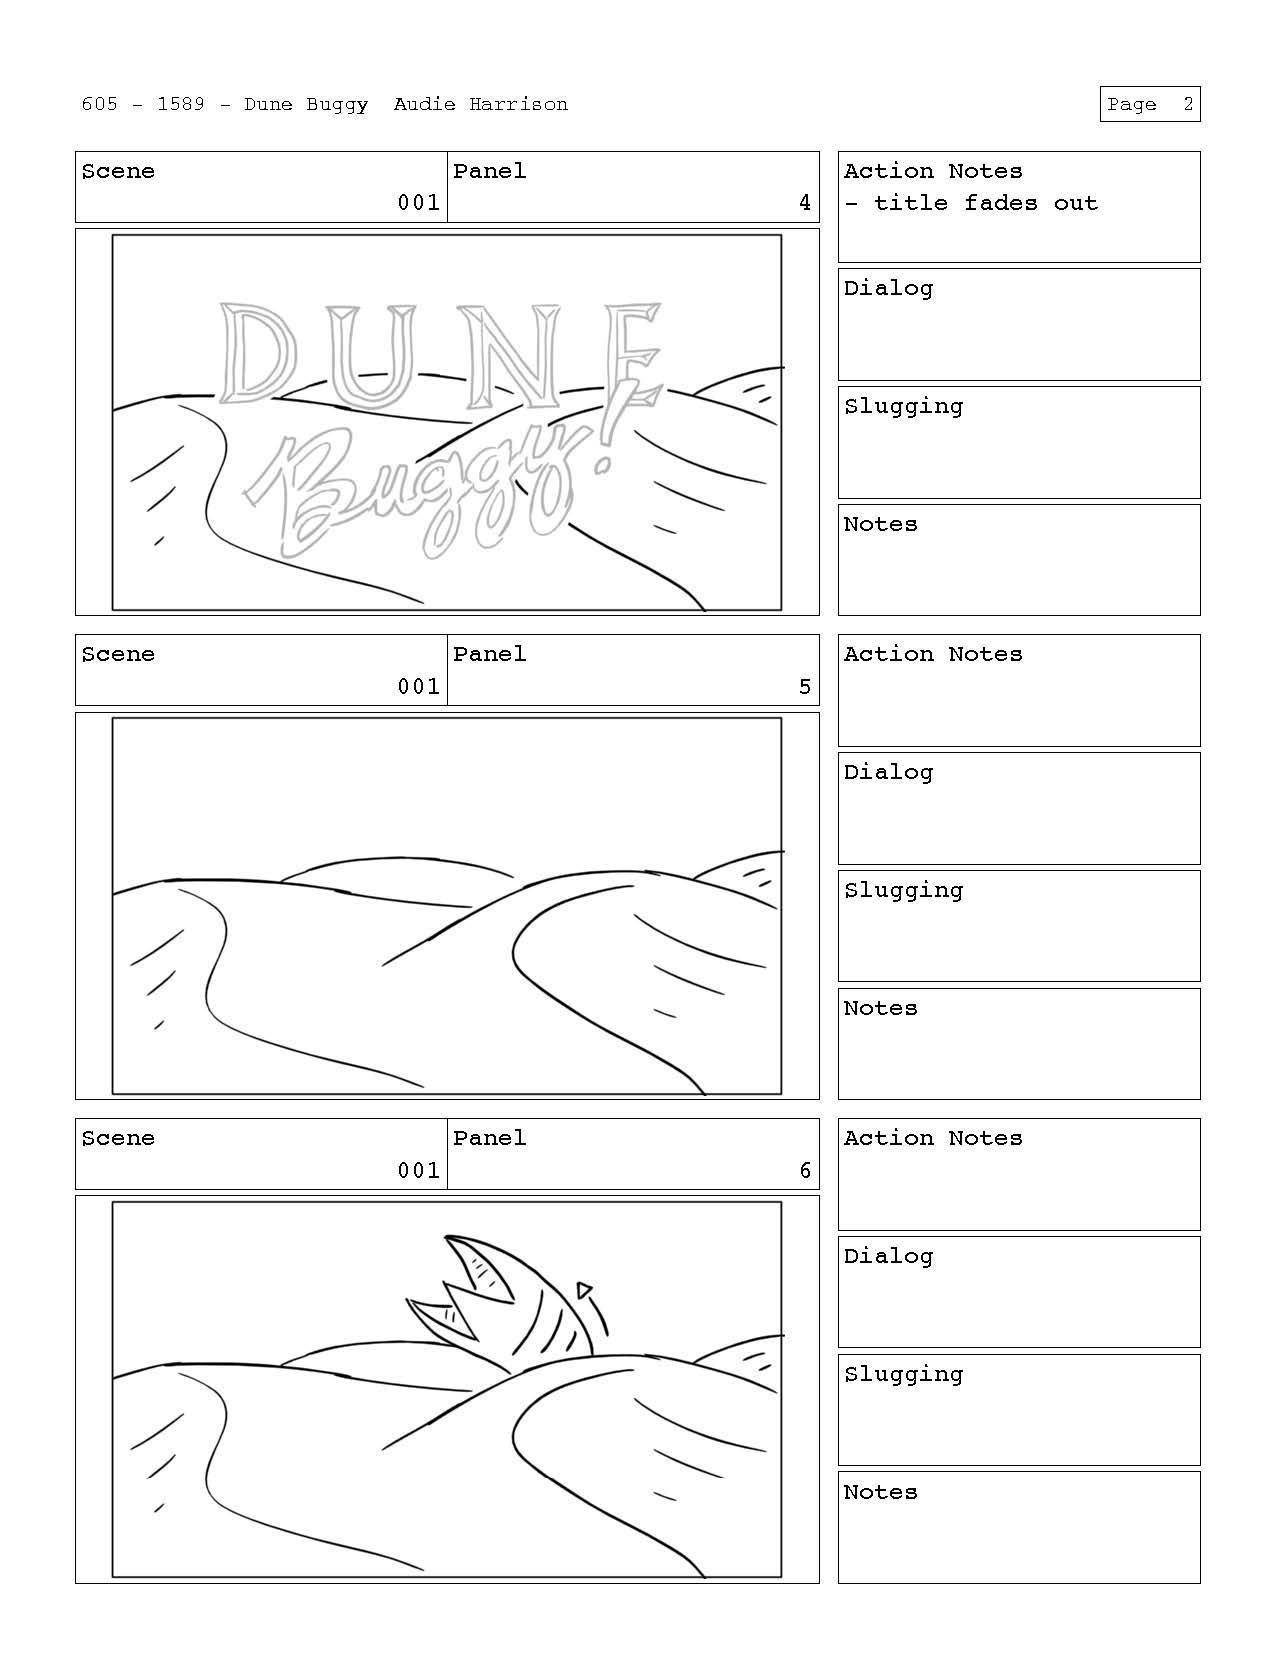 Dune_Buggy_Page_03.jpg